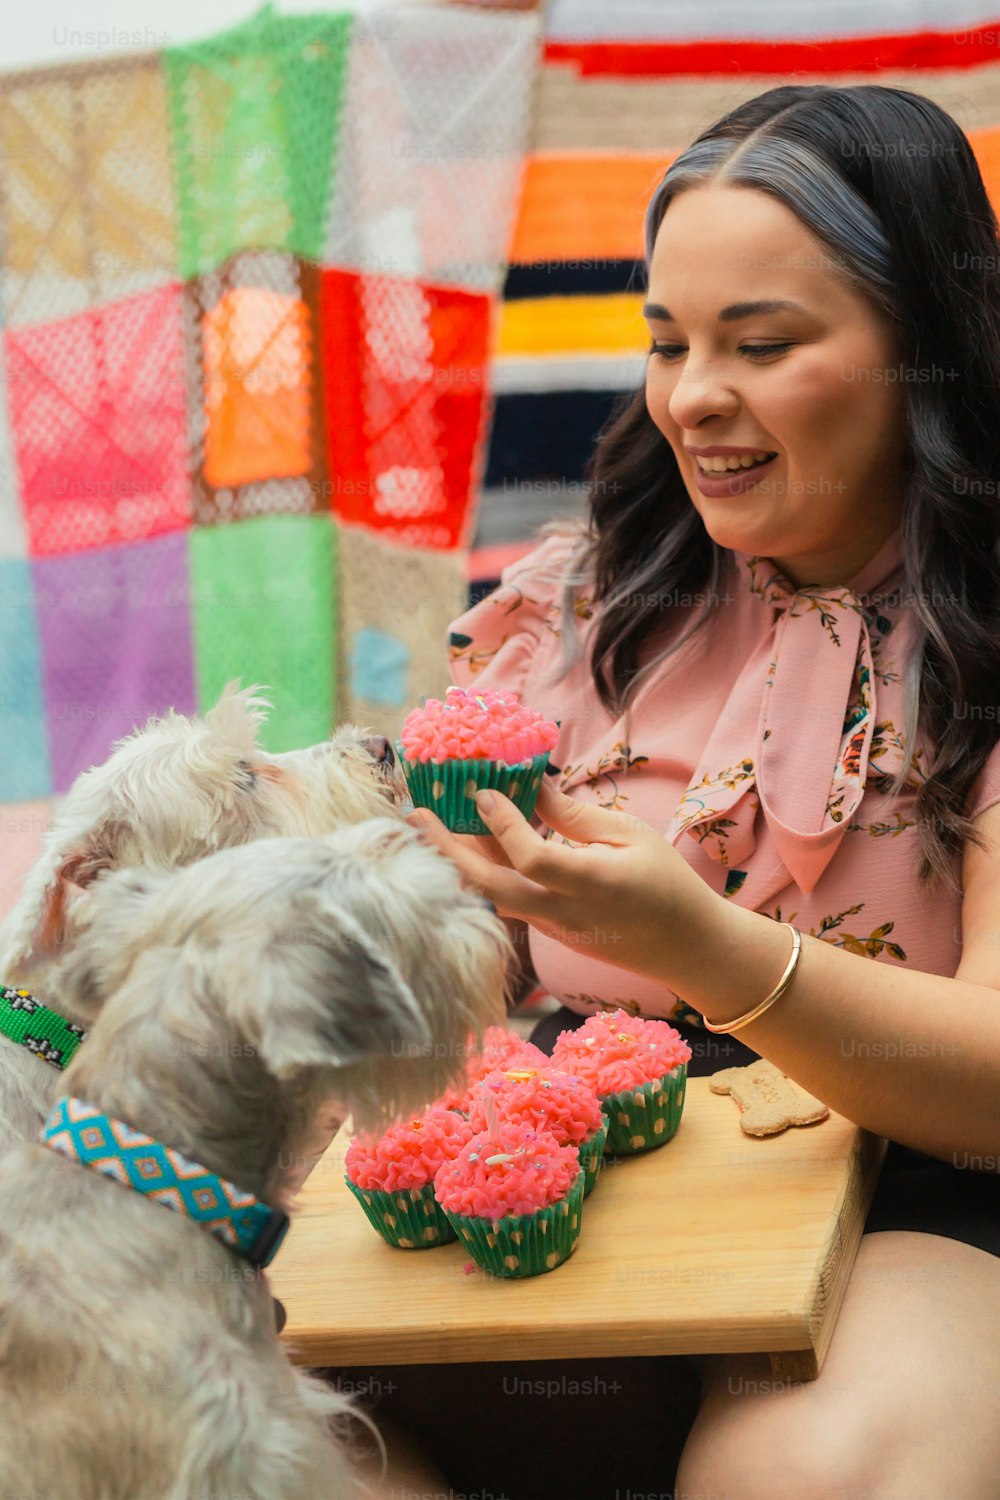 a woman is feeding cupcakes to a dog